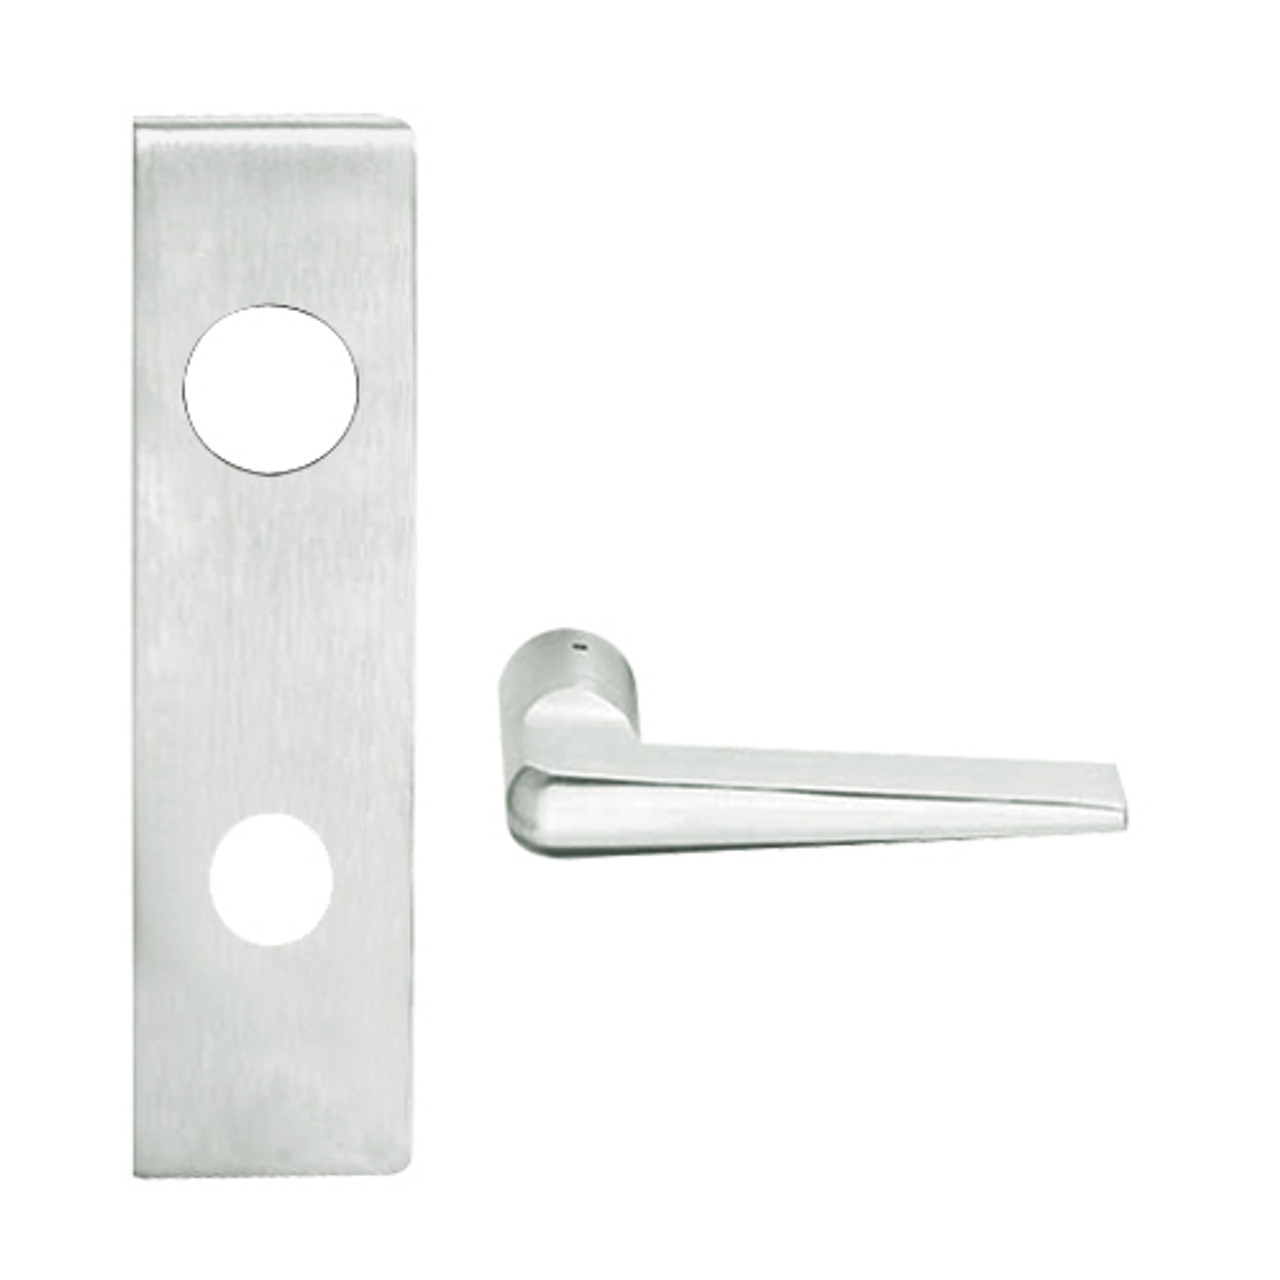 L9480L-05N-619 Schlage L Series Less Cylinder Storeroom with Deadbolt Commercial Mortise Lock with 05 Cast Lever Design in Satin Nickel